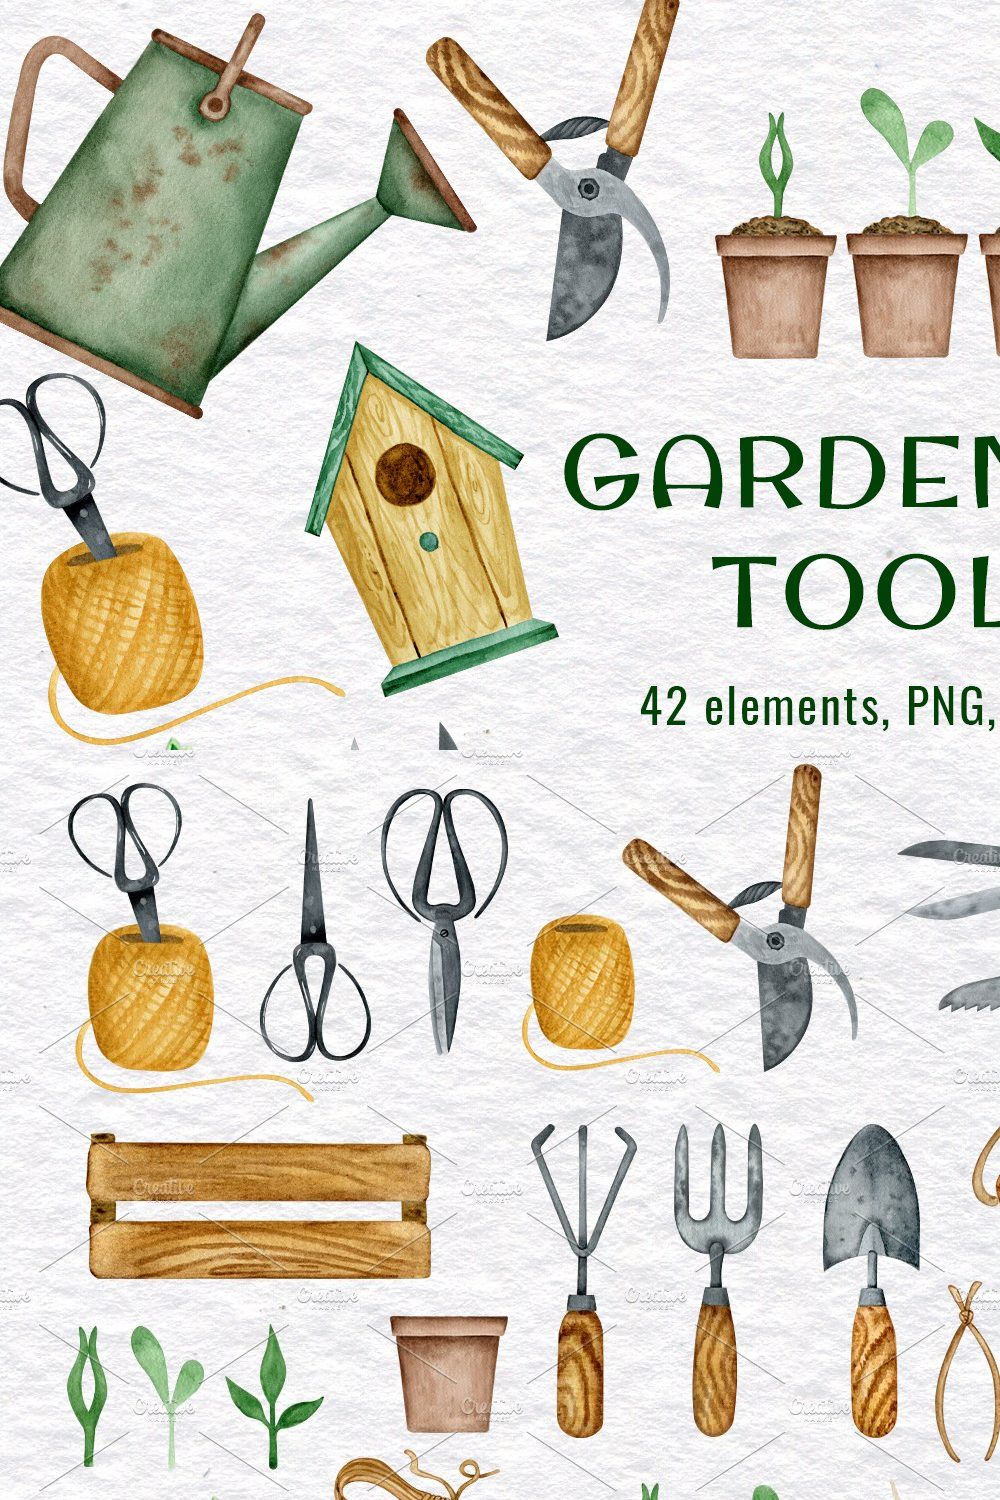 Vintage watercolor gardening tools pinterest preview image.